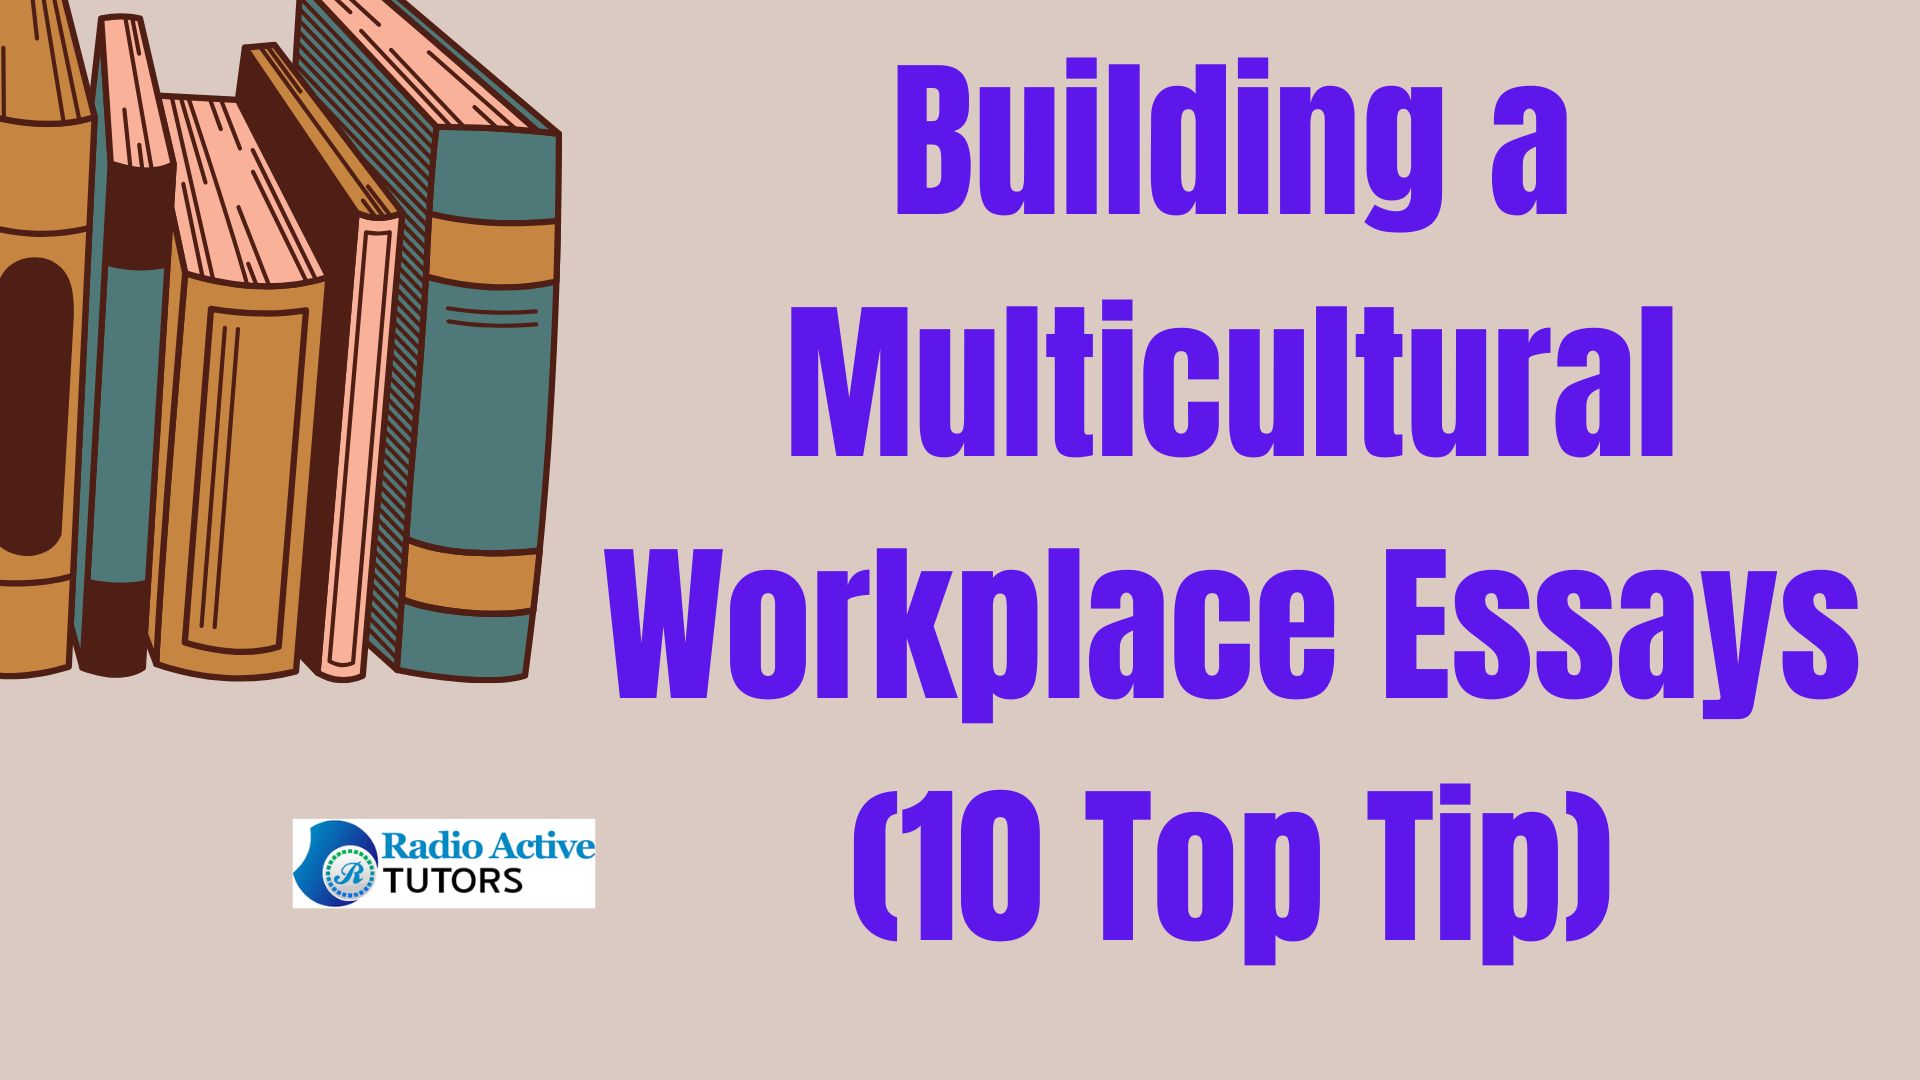 Building a Multicultural Workplace Essays (10 Top Tip)